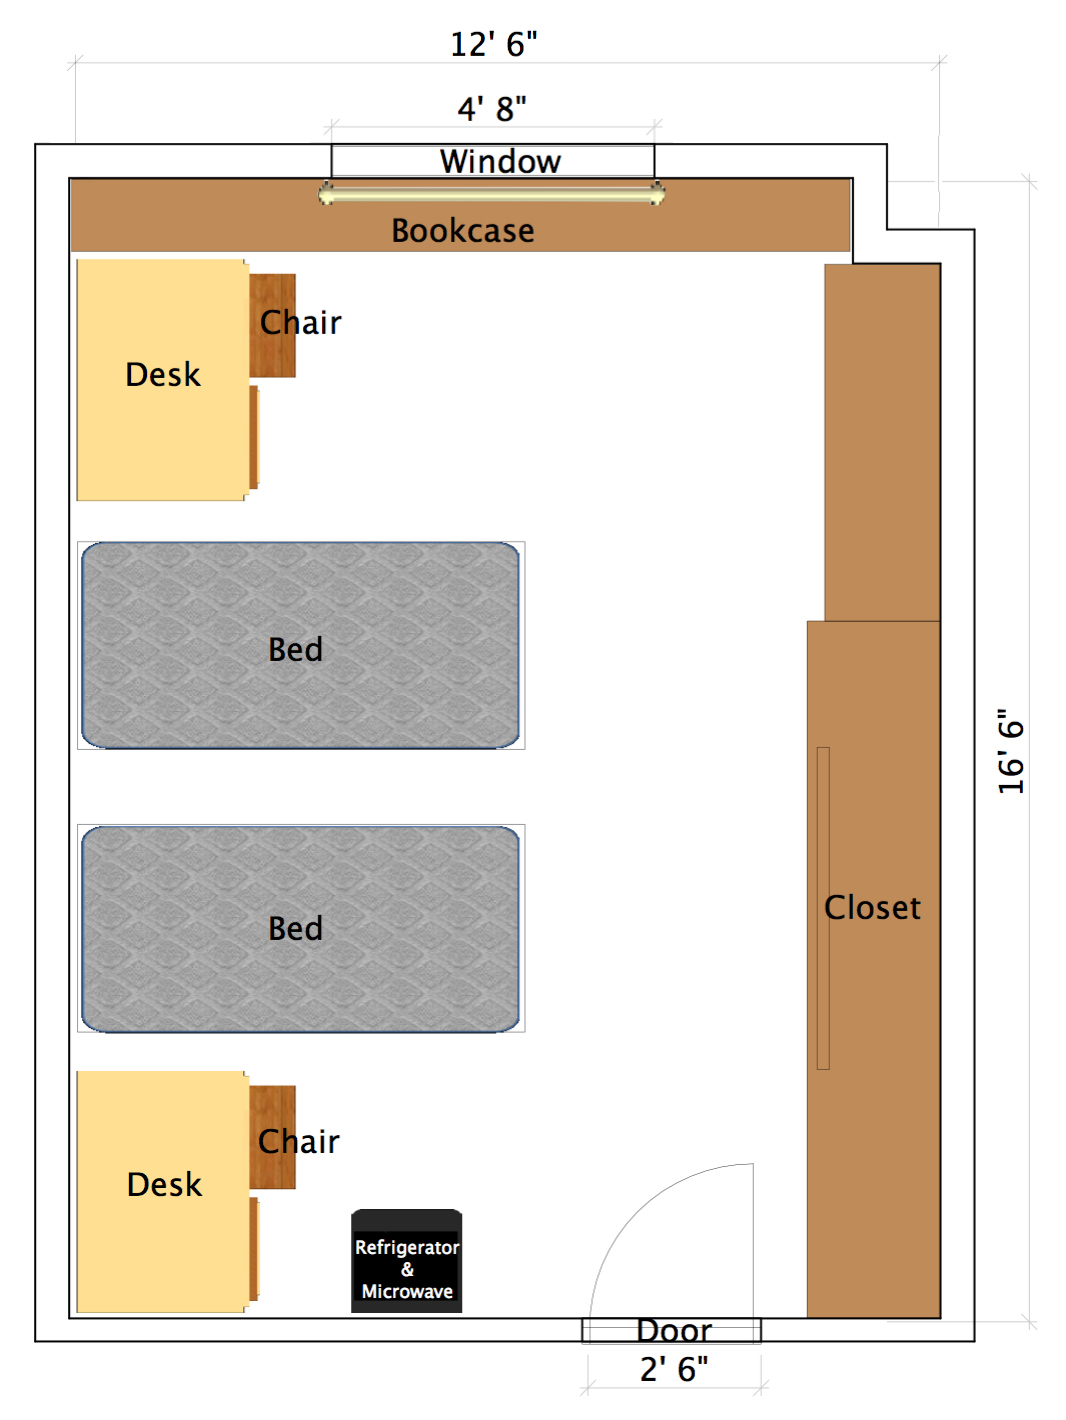 diagram of typical double room layout with desks, beds, and closets